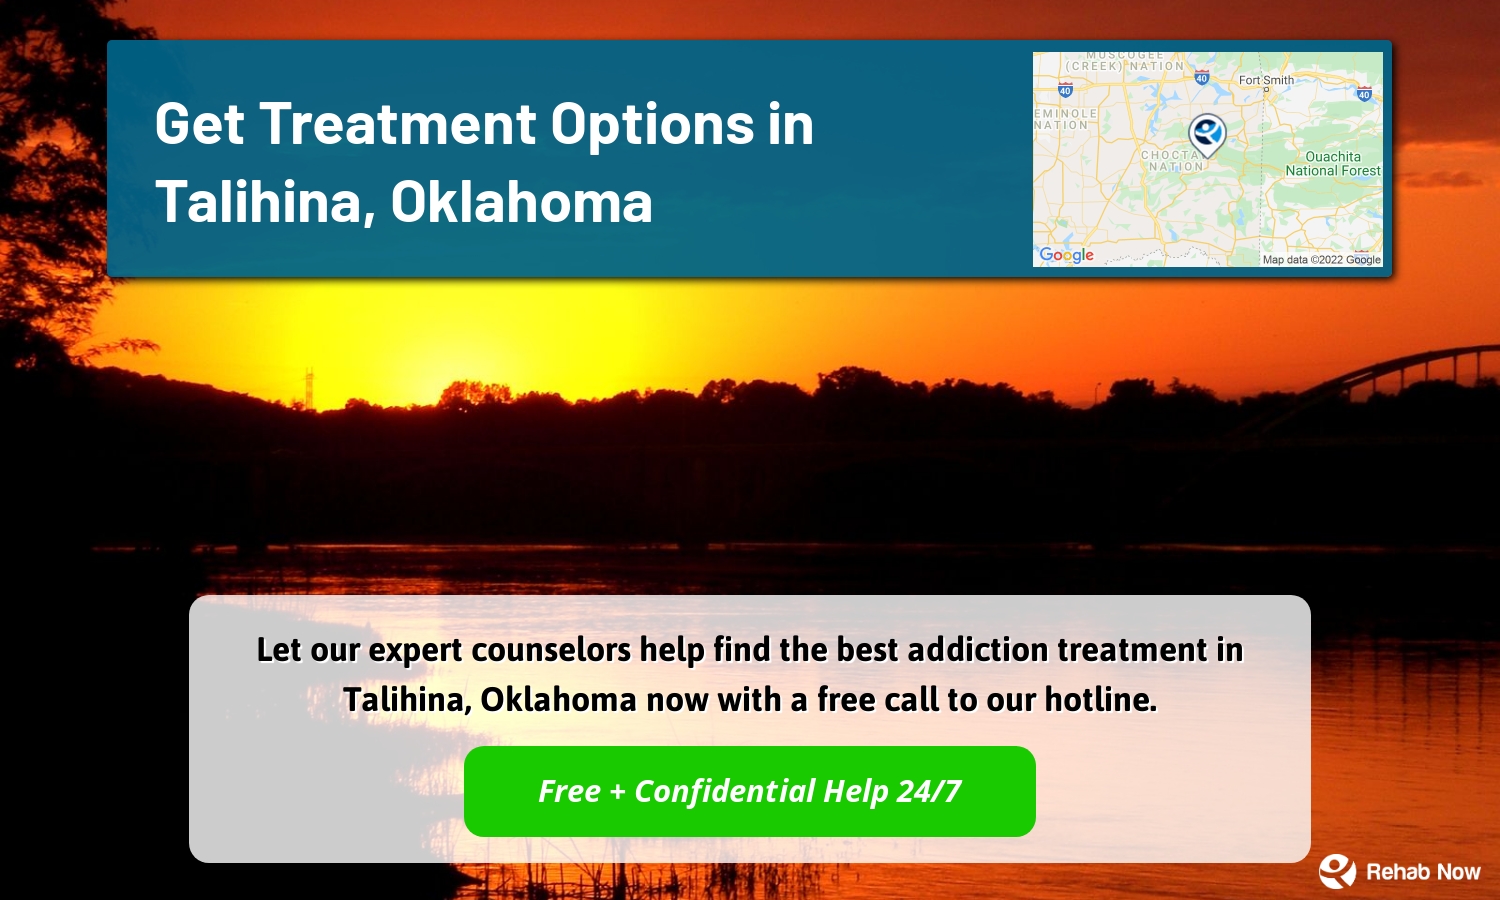 Let our expert counselors help find the best addiction treatment in Talihina, Oklahoma now with a free call to our hotline.